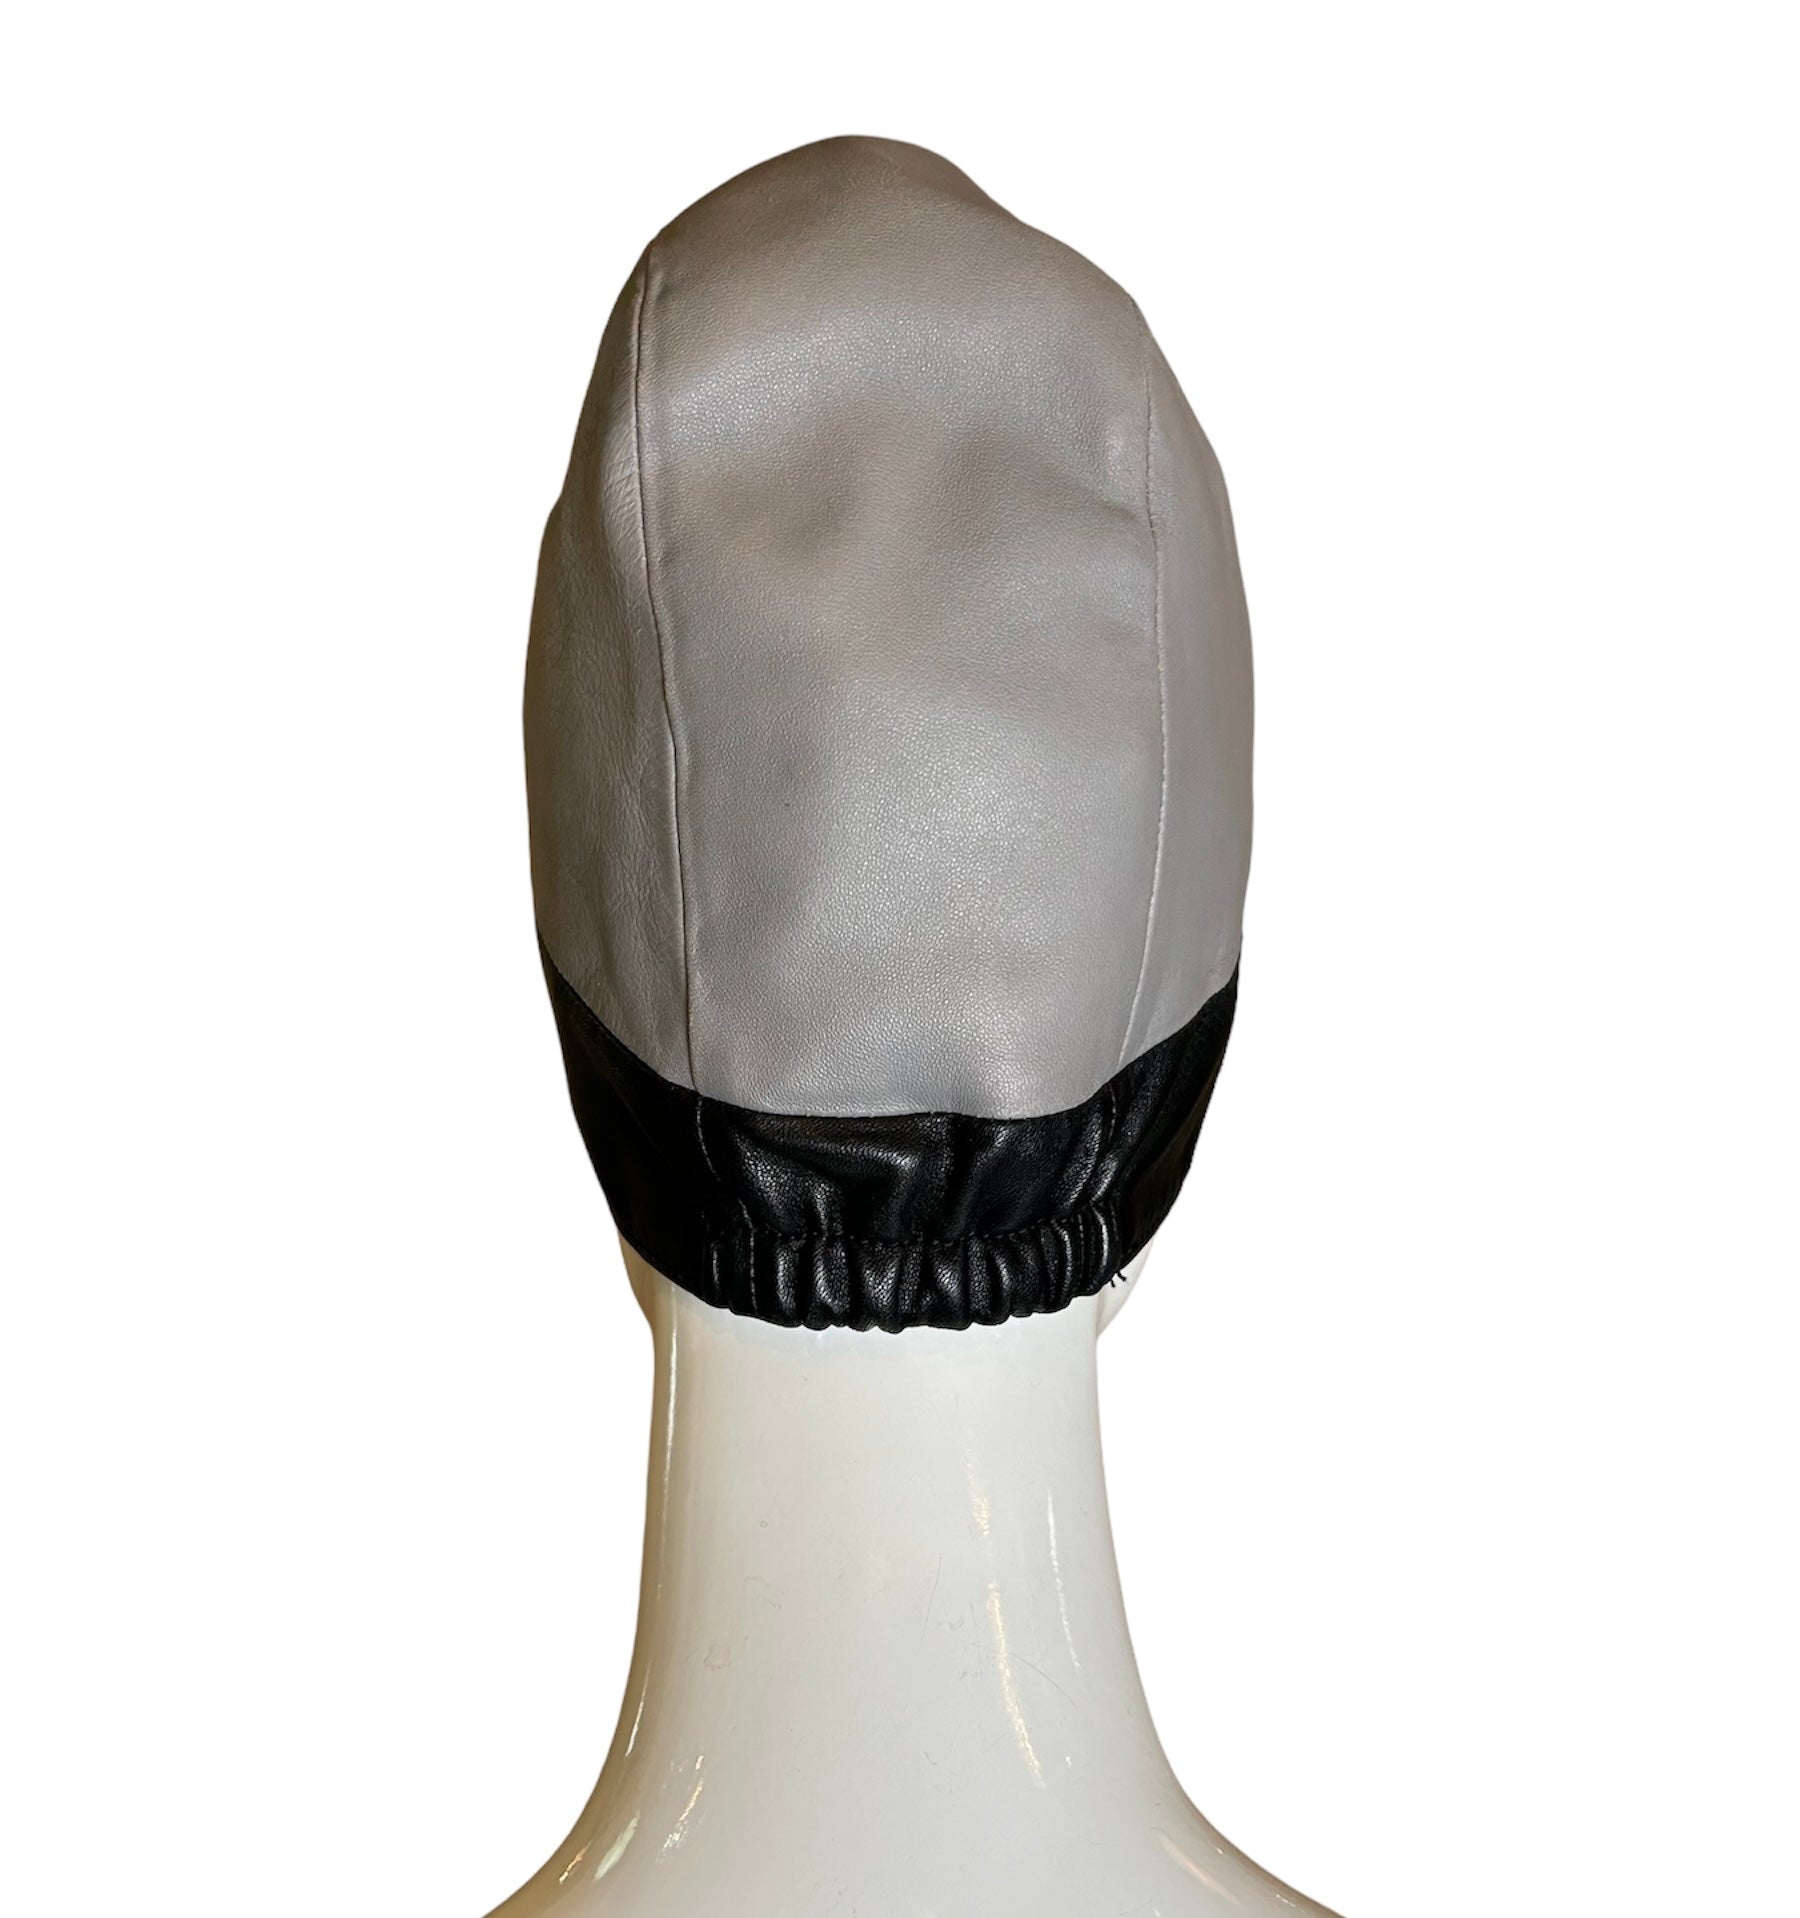 PRADA 60s Inspired Leather Cloche BACK PHOTO 3 OF 4